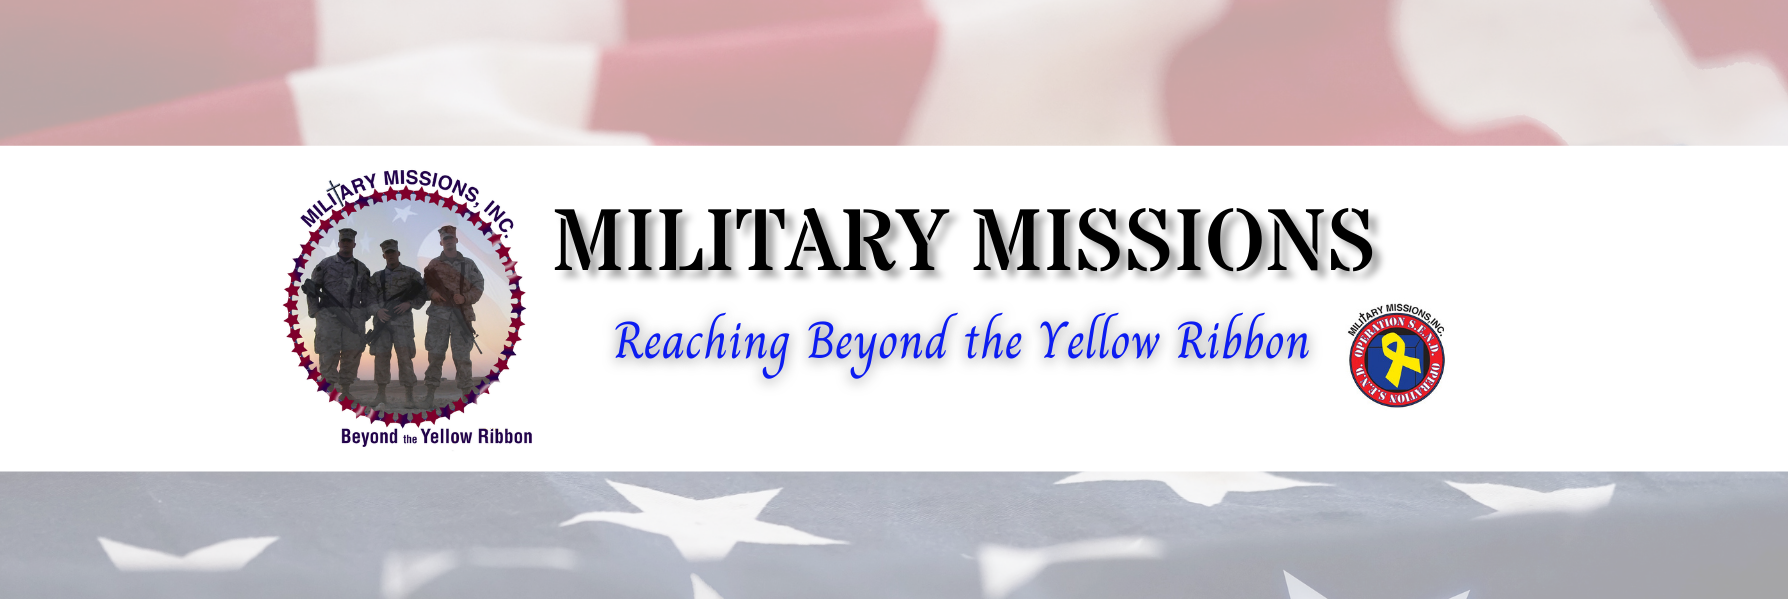 Military Missions